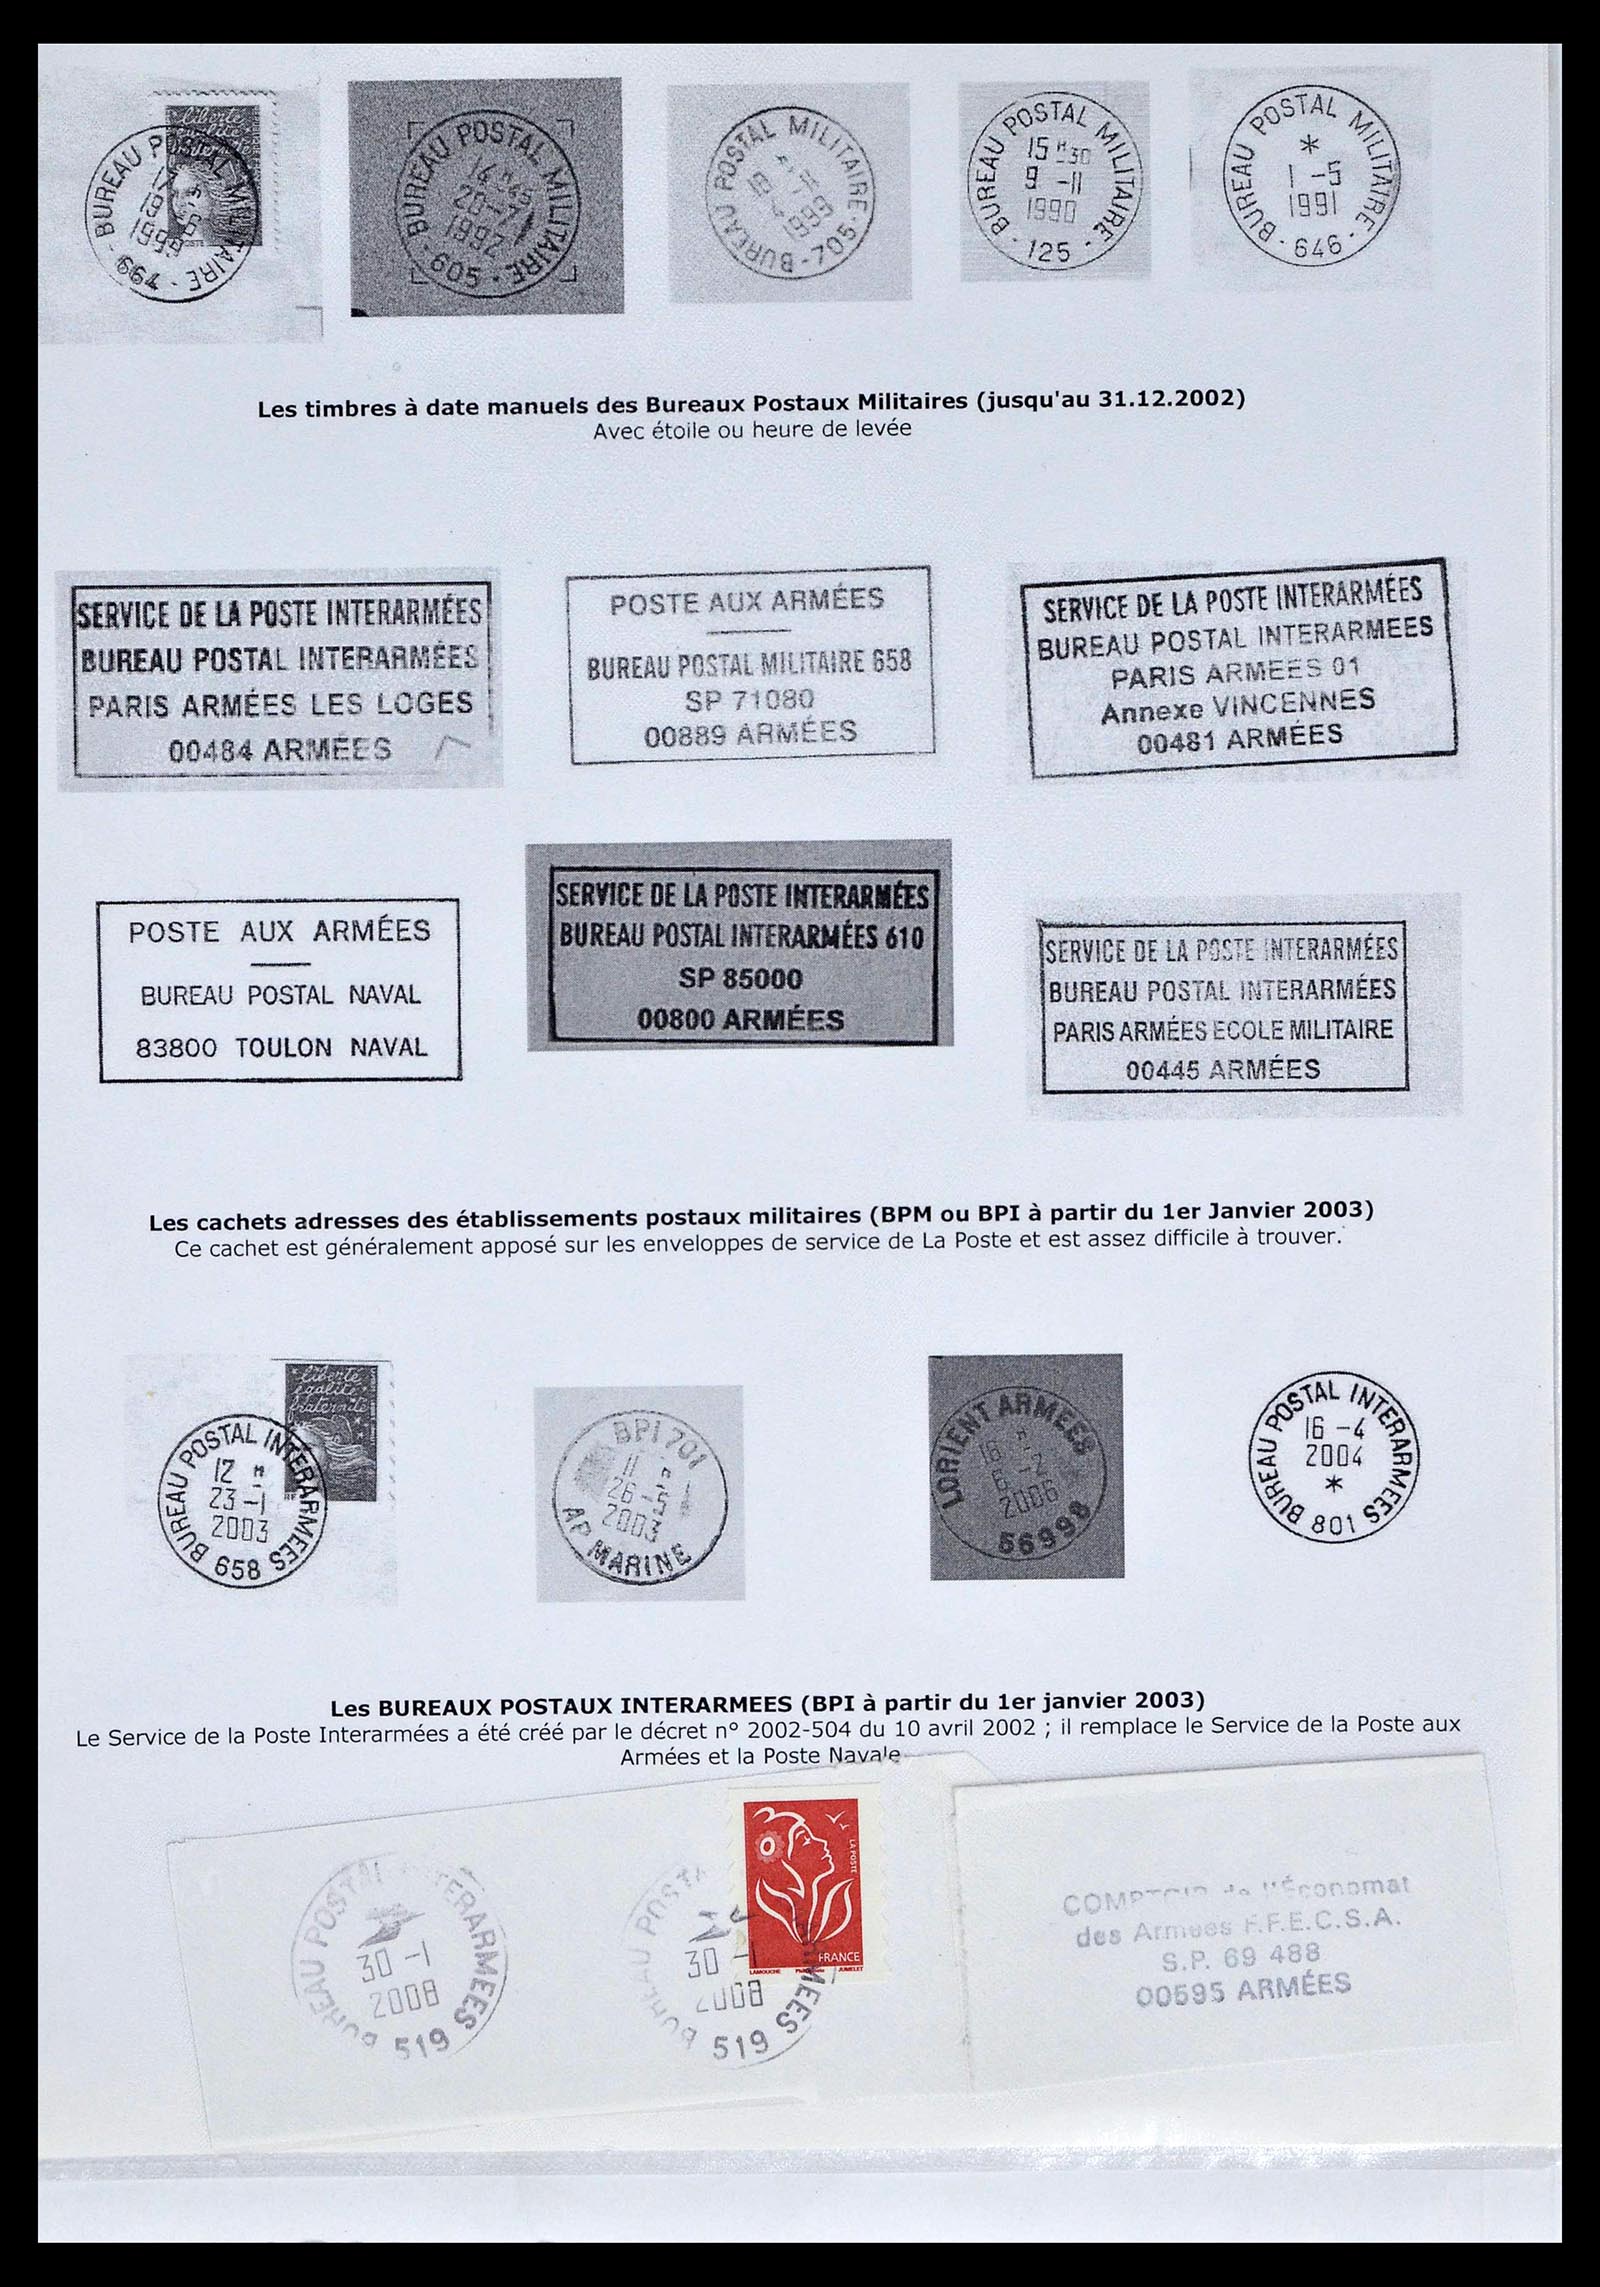 39101 0094 - Stamp collection 39101 France military post 1780(!)-2010.